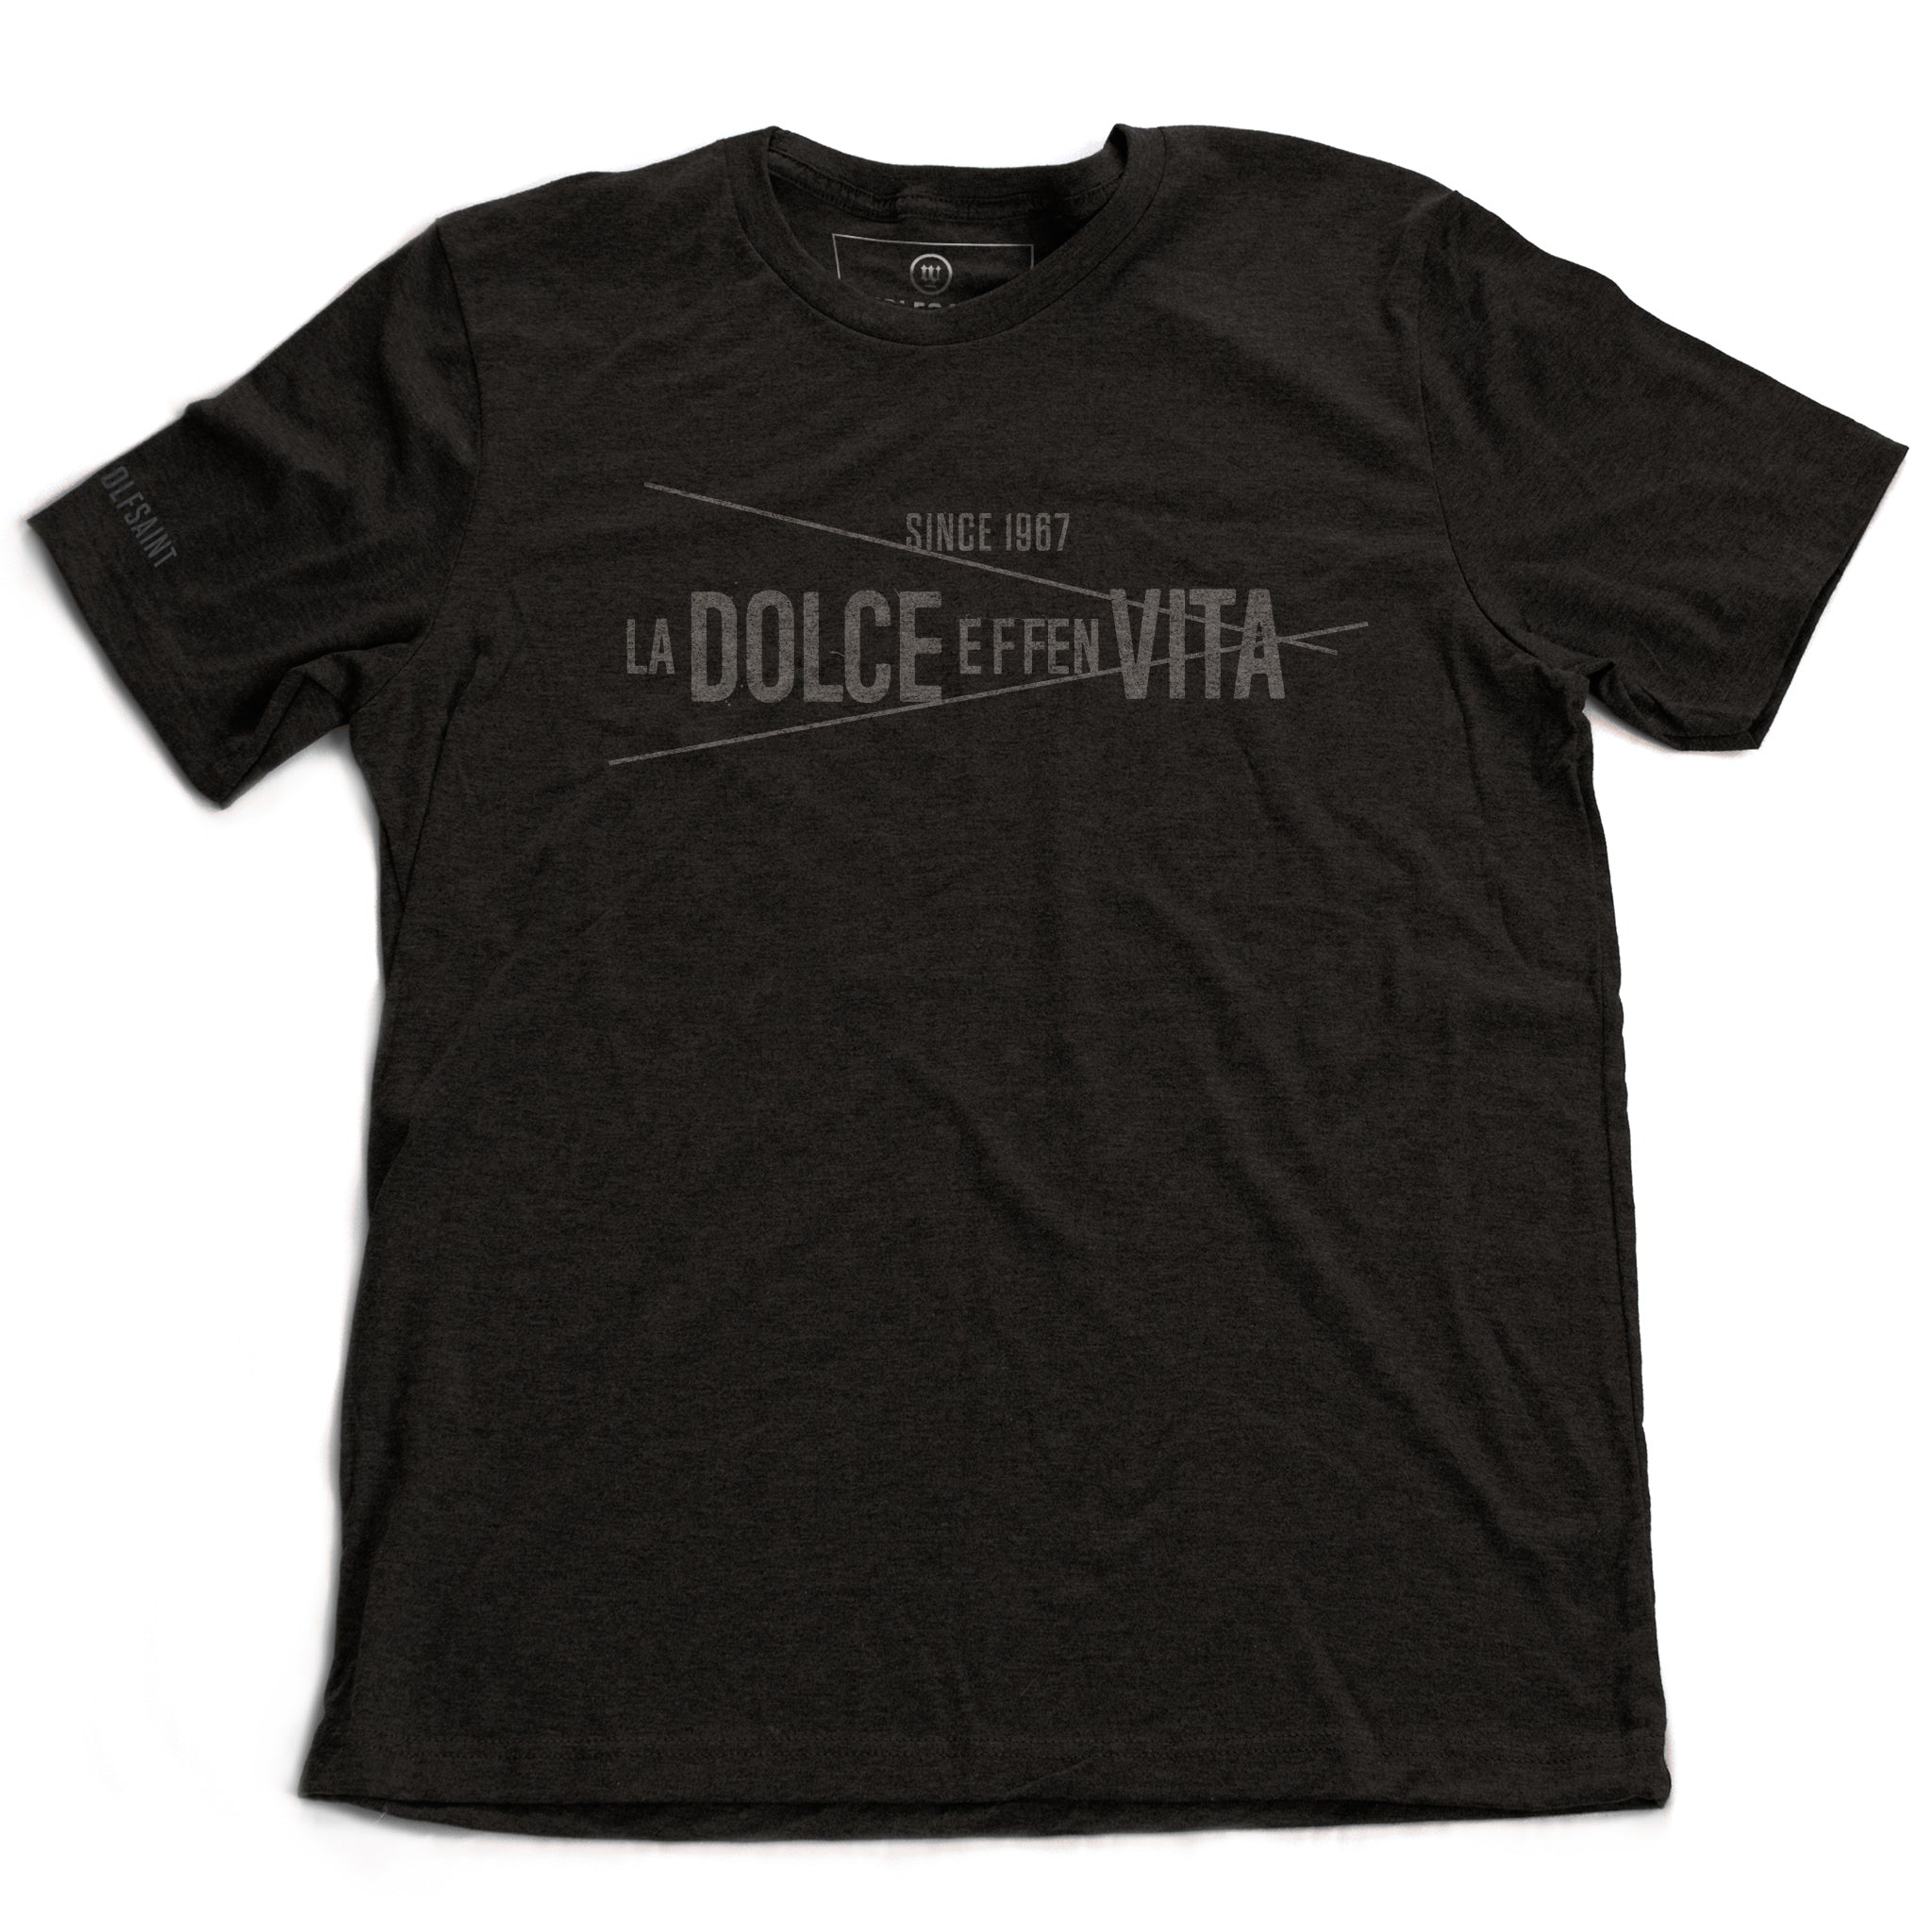 A Dark Gray Heather fashion t-shirt with a clean graphic with a sarcastic version of a classic Italian phrase: “LA DOLCE EFFEN VITA” — the sweet f***ing life, by fashion brand Wolfsaint.net 